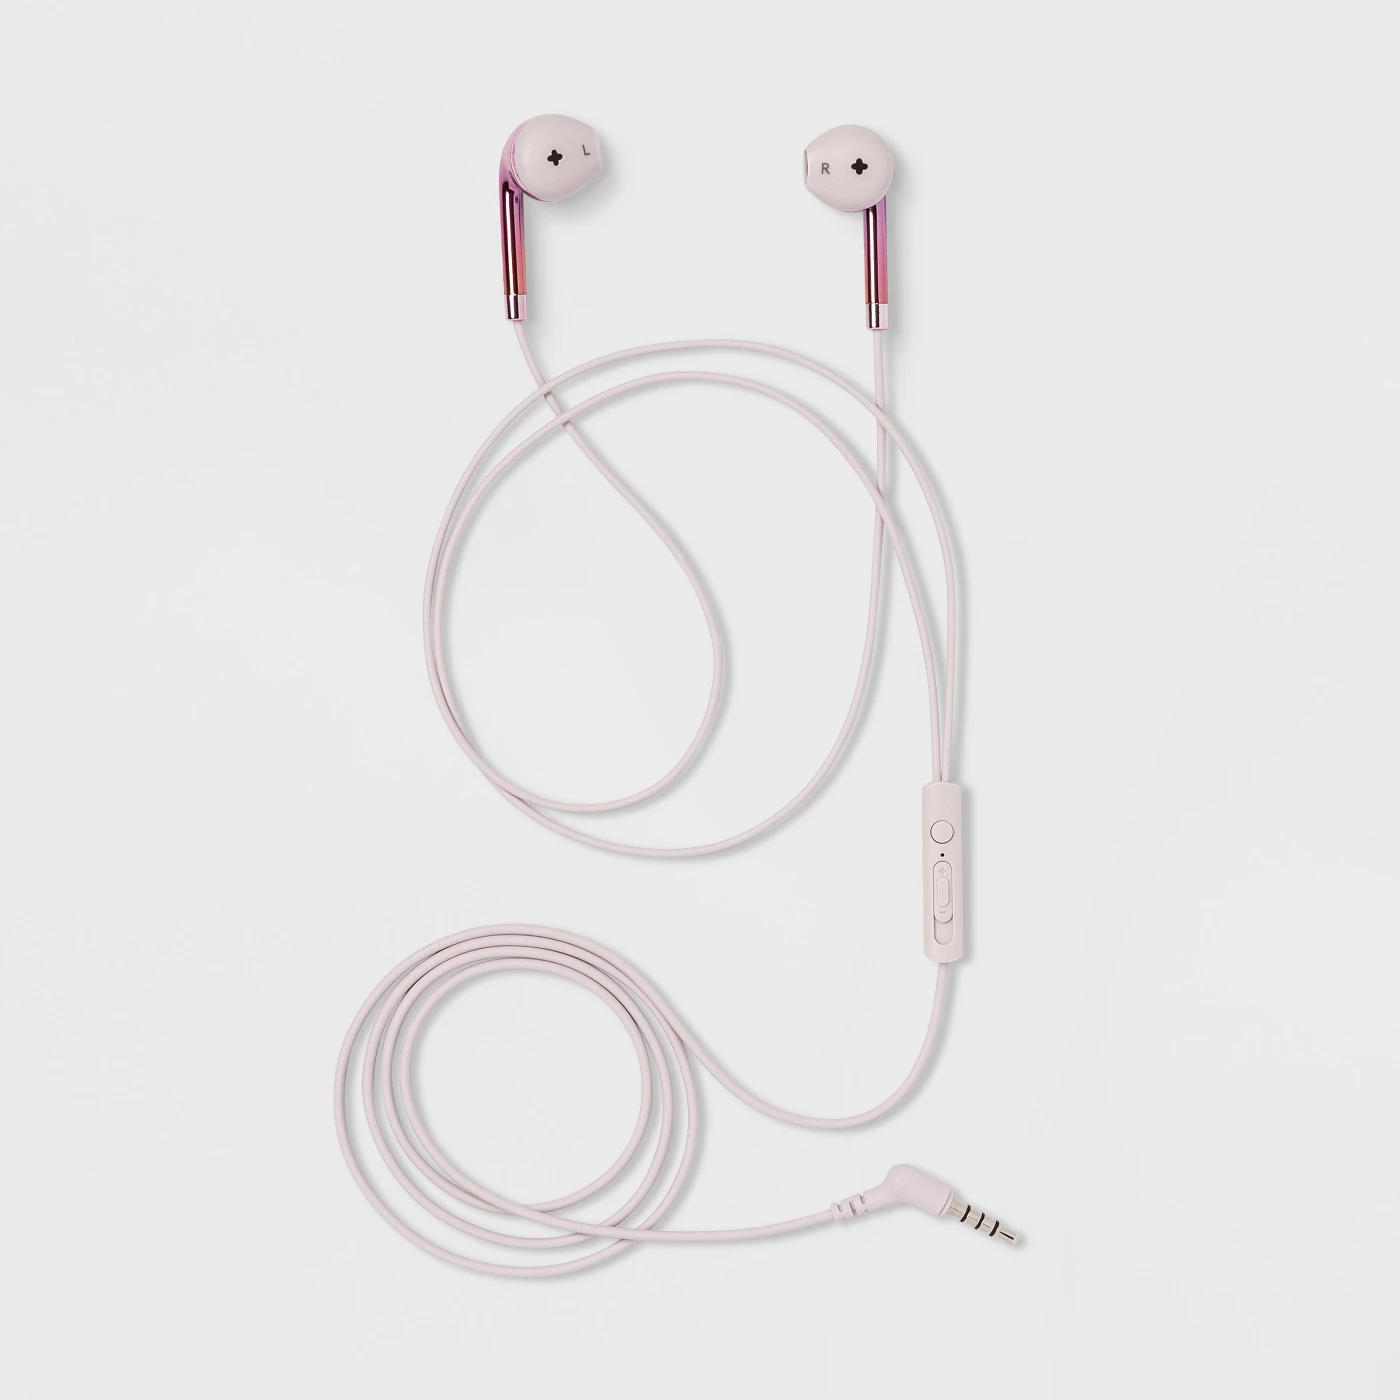 heyday™ Wired Earbuds - Ballet Pink - image 1 of 3